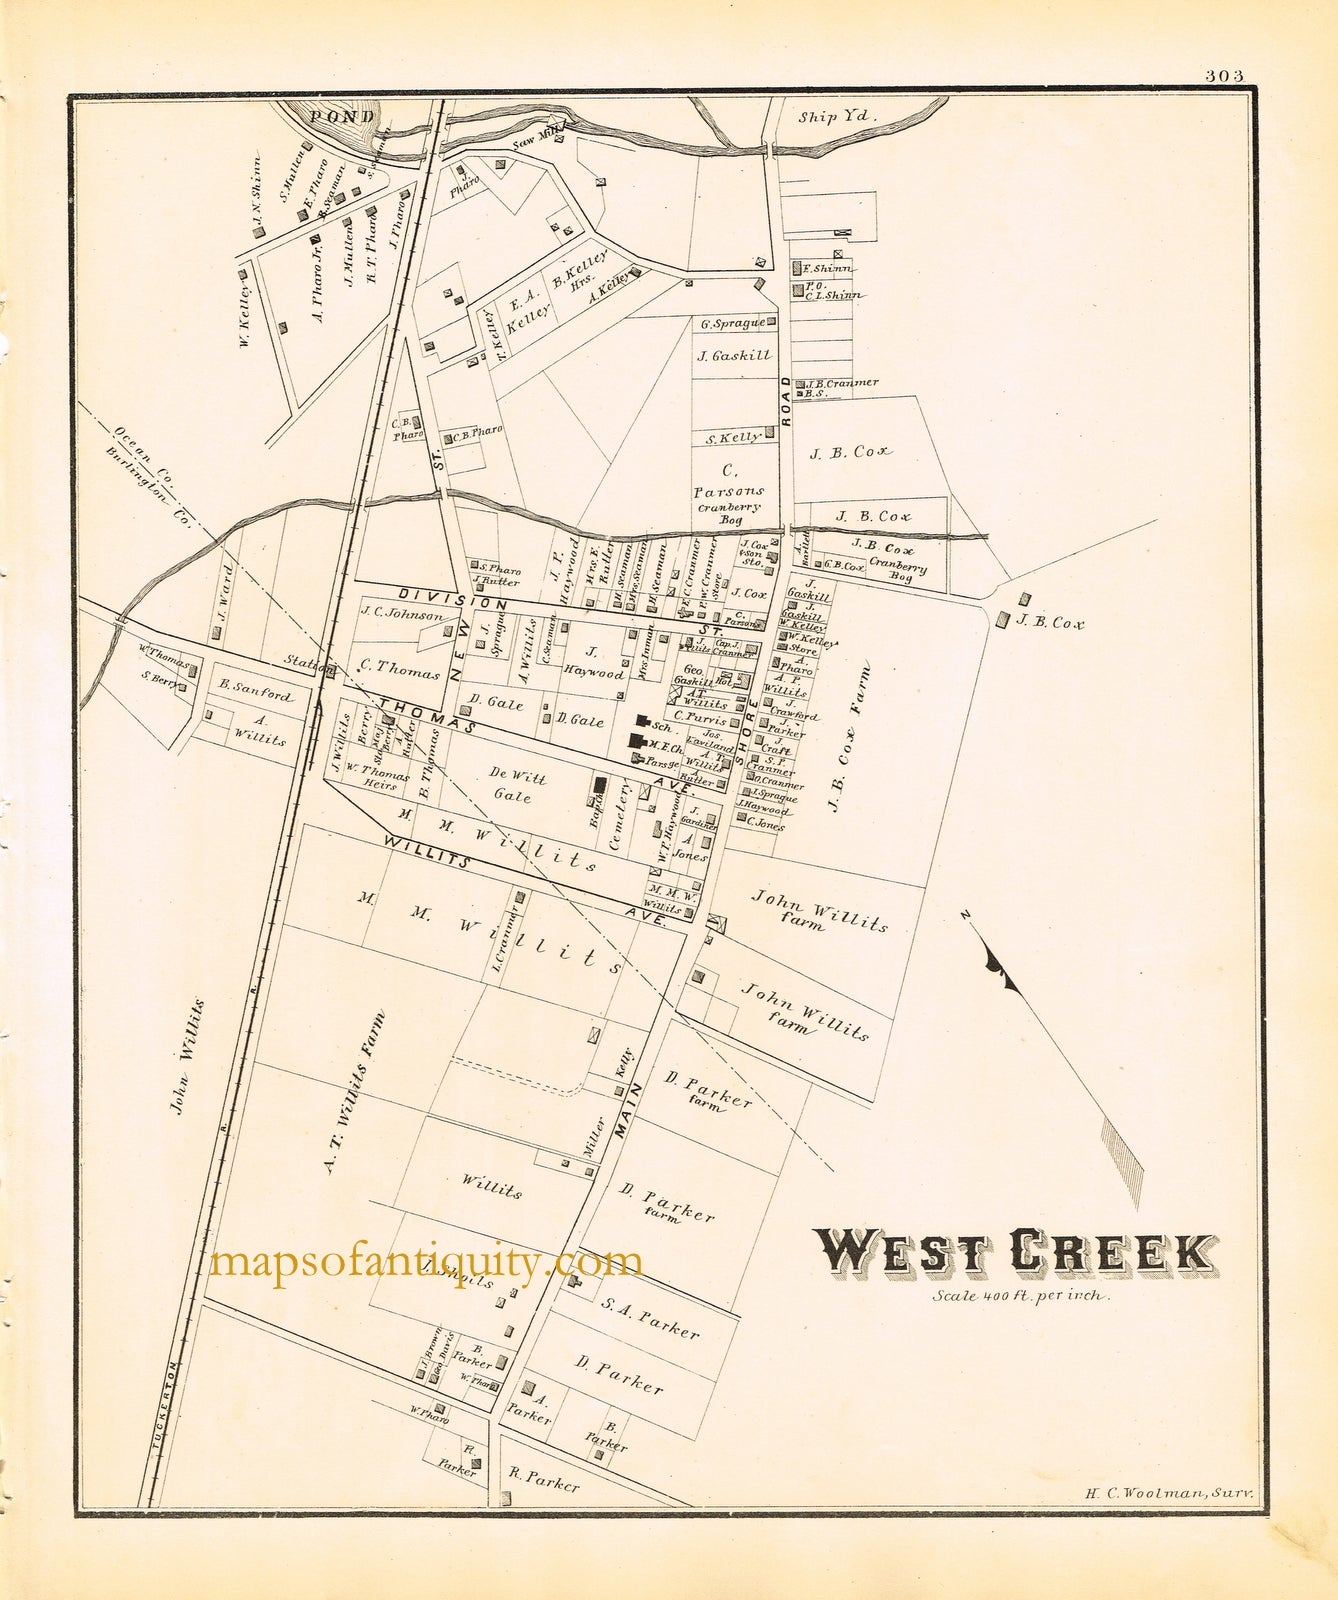 Black-and-White-Engraved-Antique-Map-West-Creek-N.J.-United-States-New-Jersey-1878-Woolman-&-Rose-Maps-Of-Antiquity